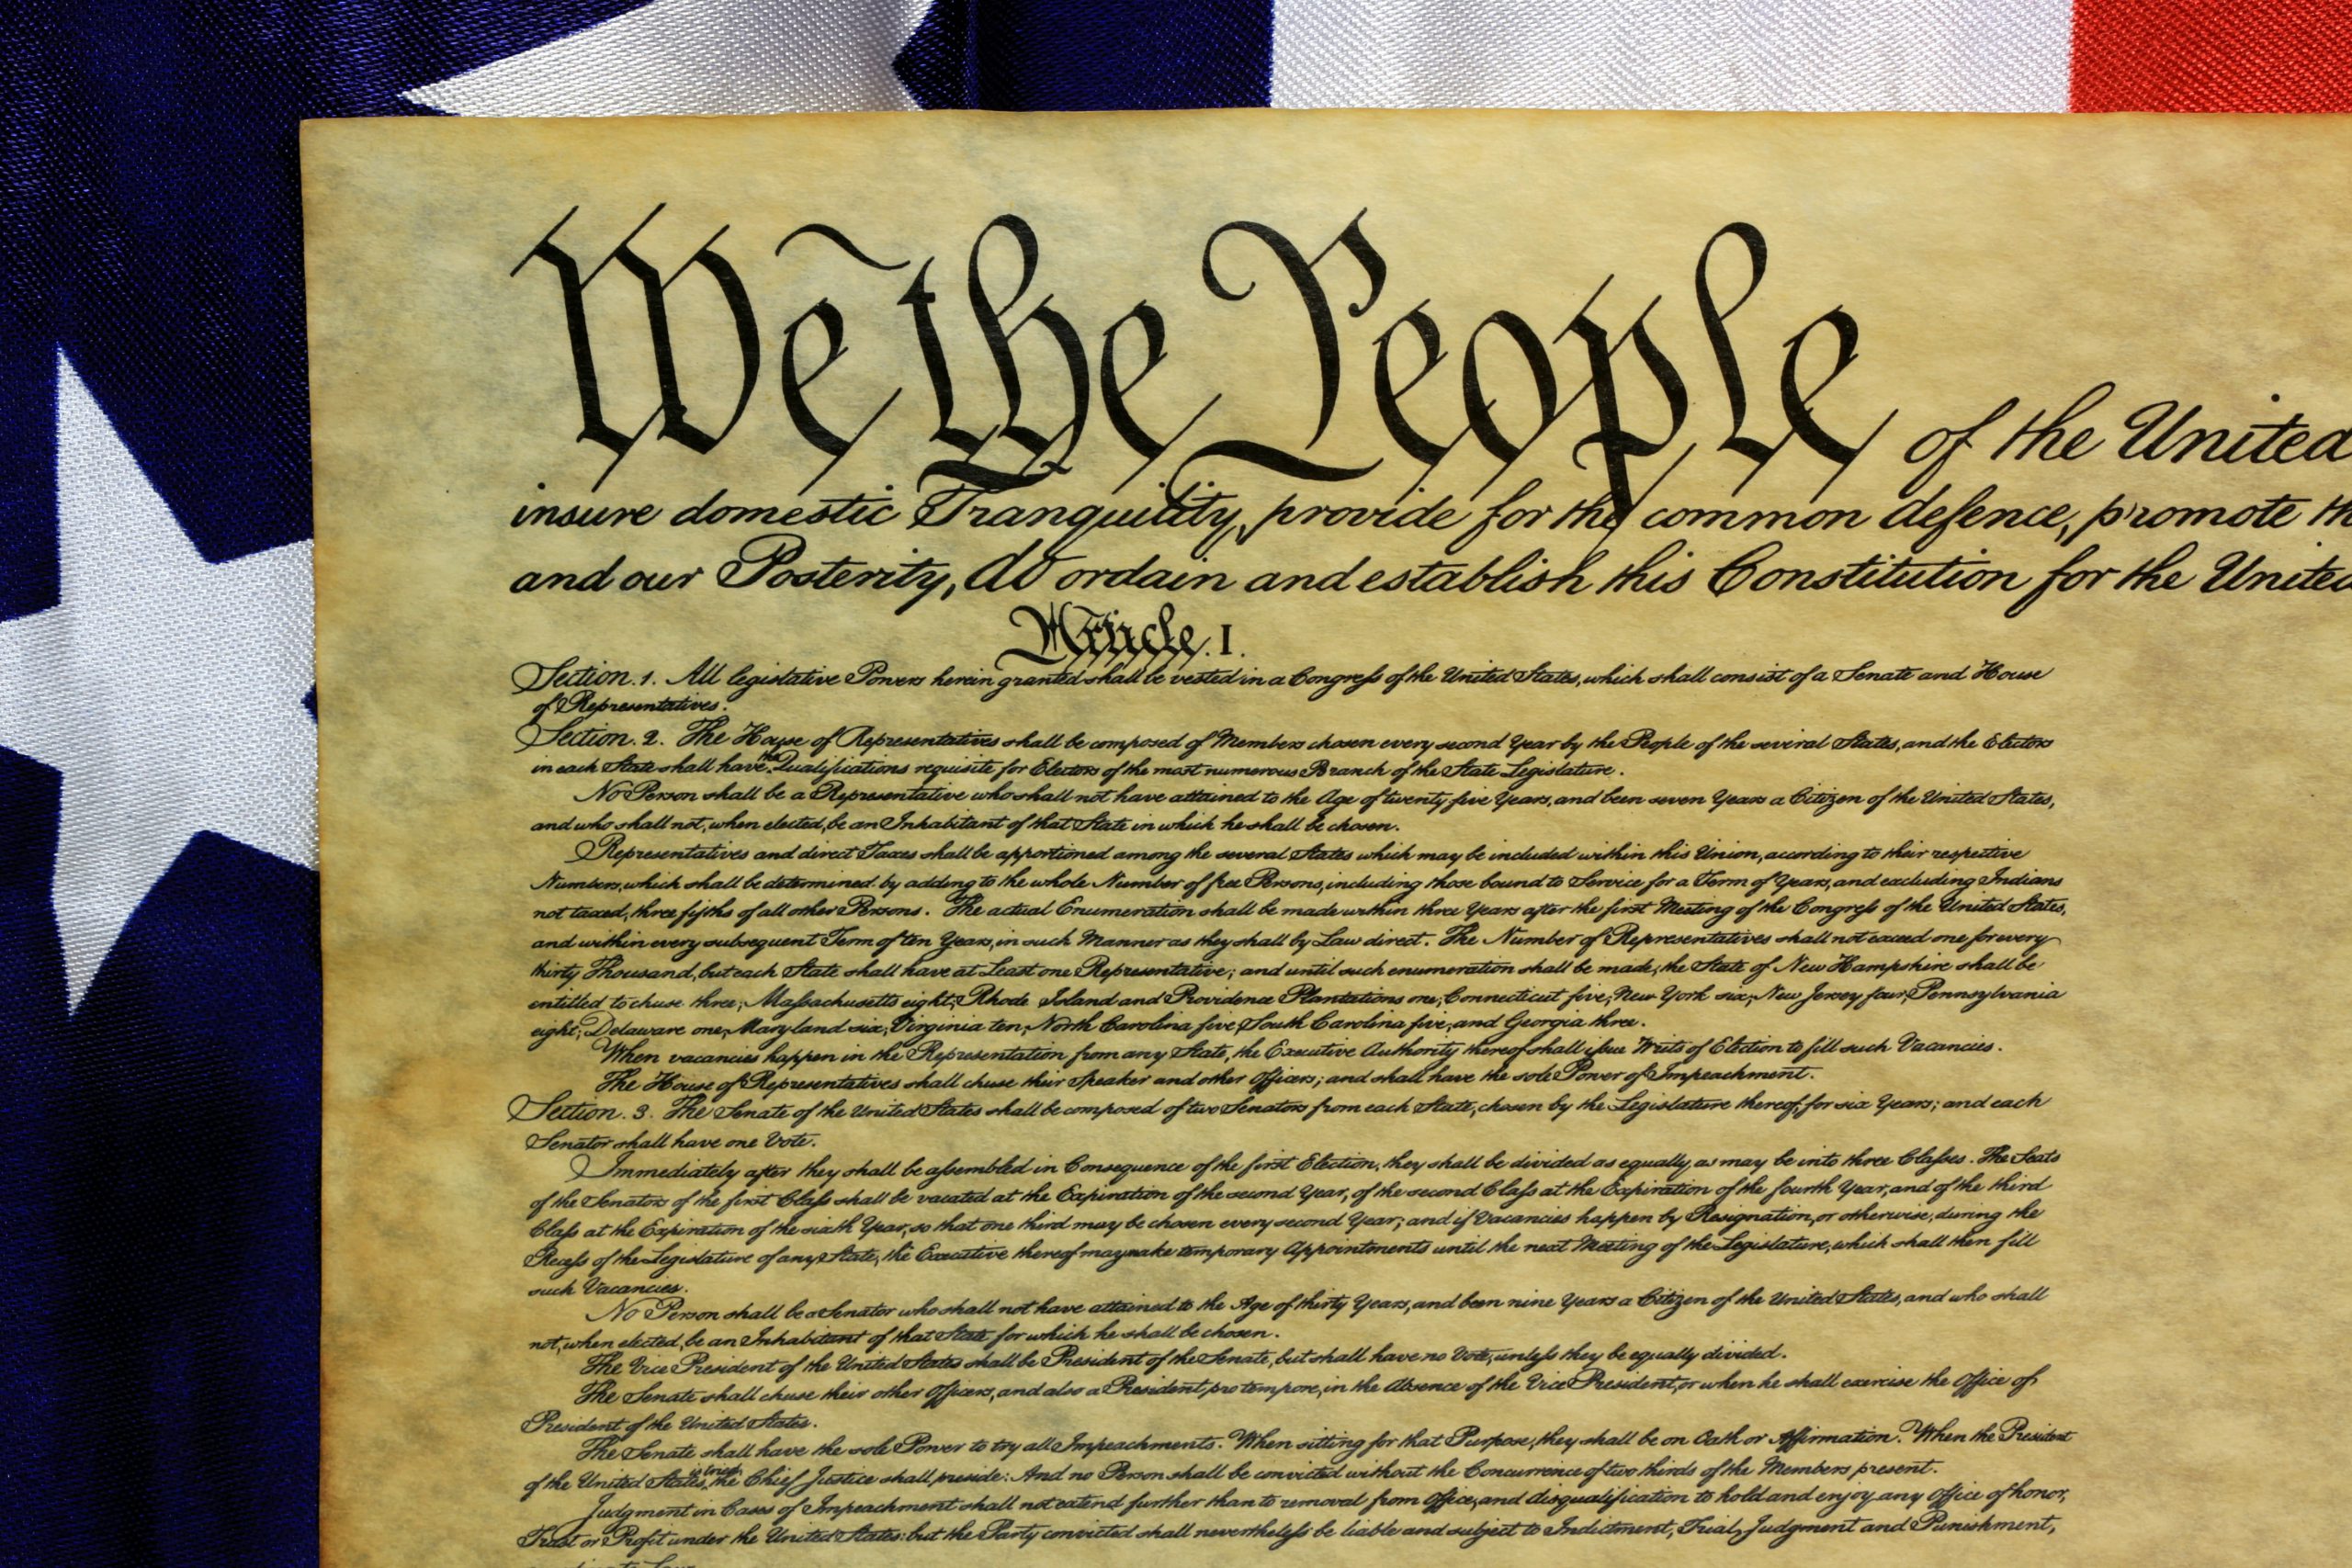 Obey the constitution, don’t rewrite it